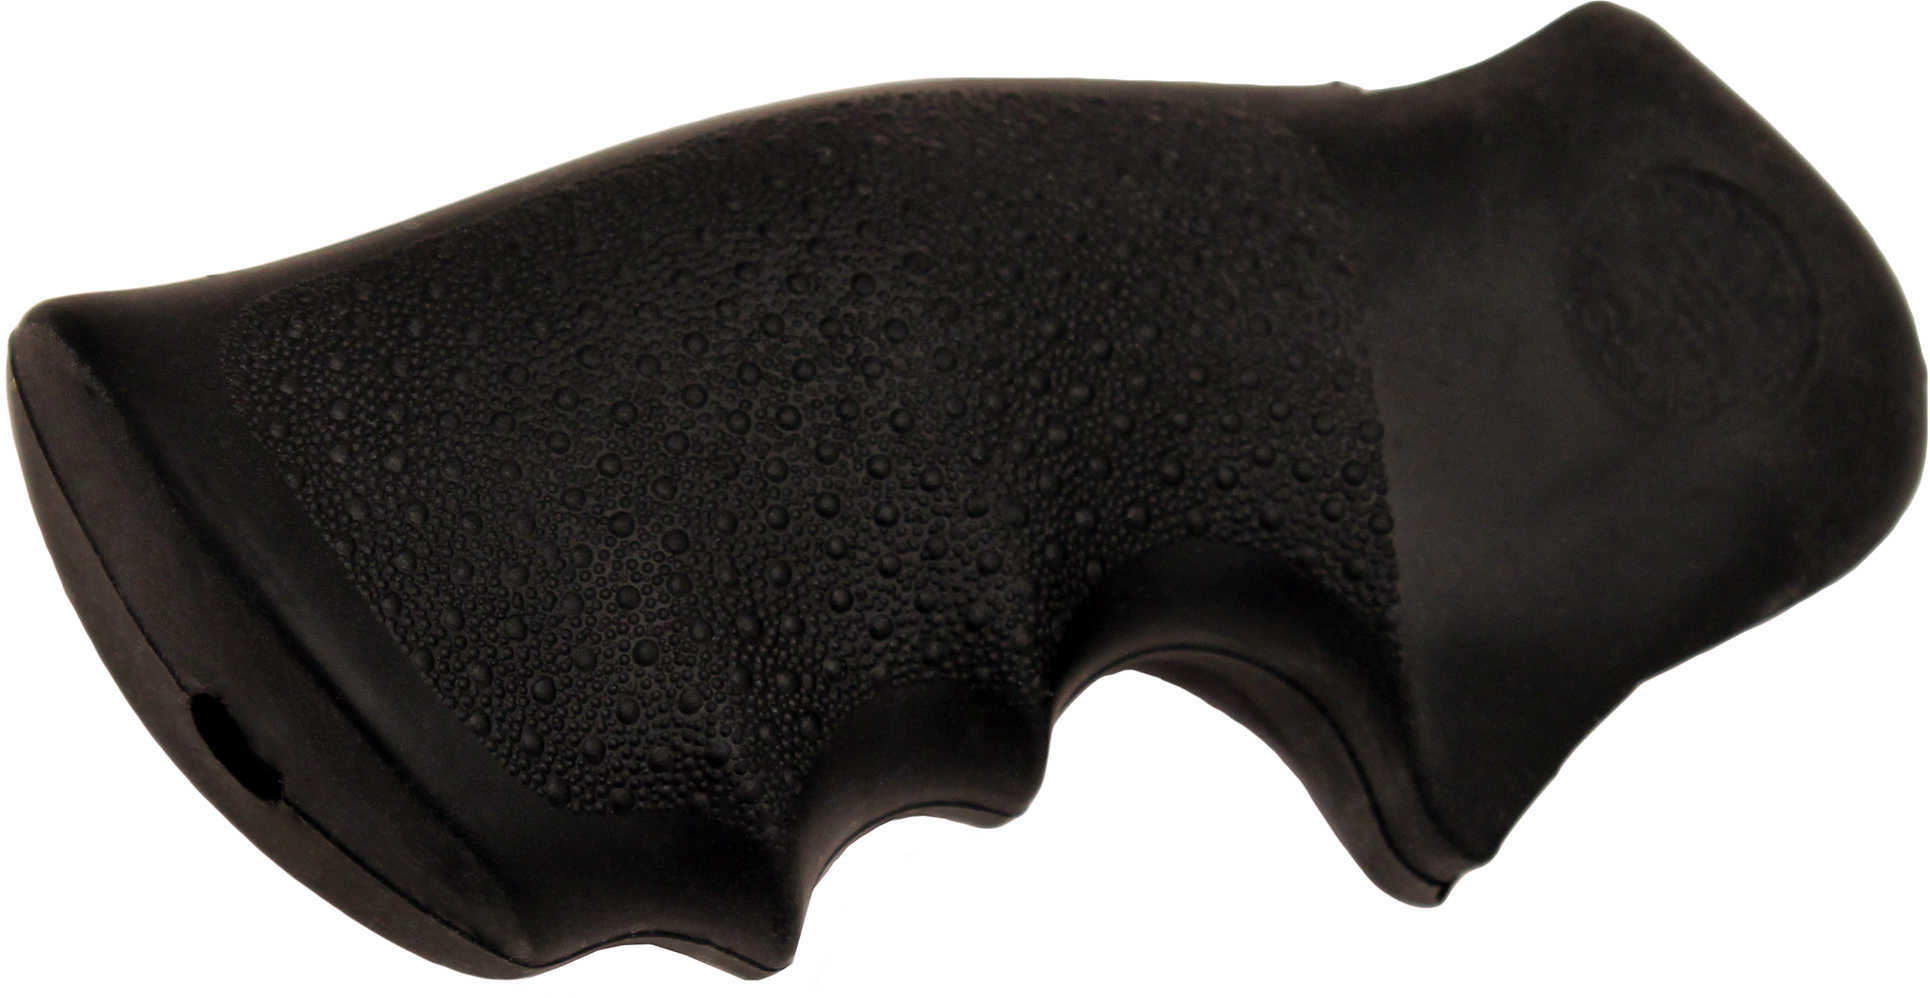 Hogue Grips S&W K & L Frame Square Butt Rubber